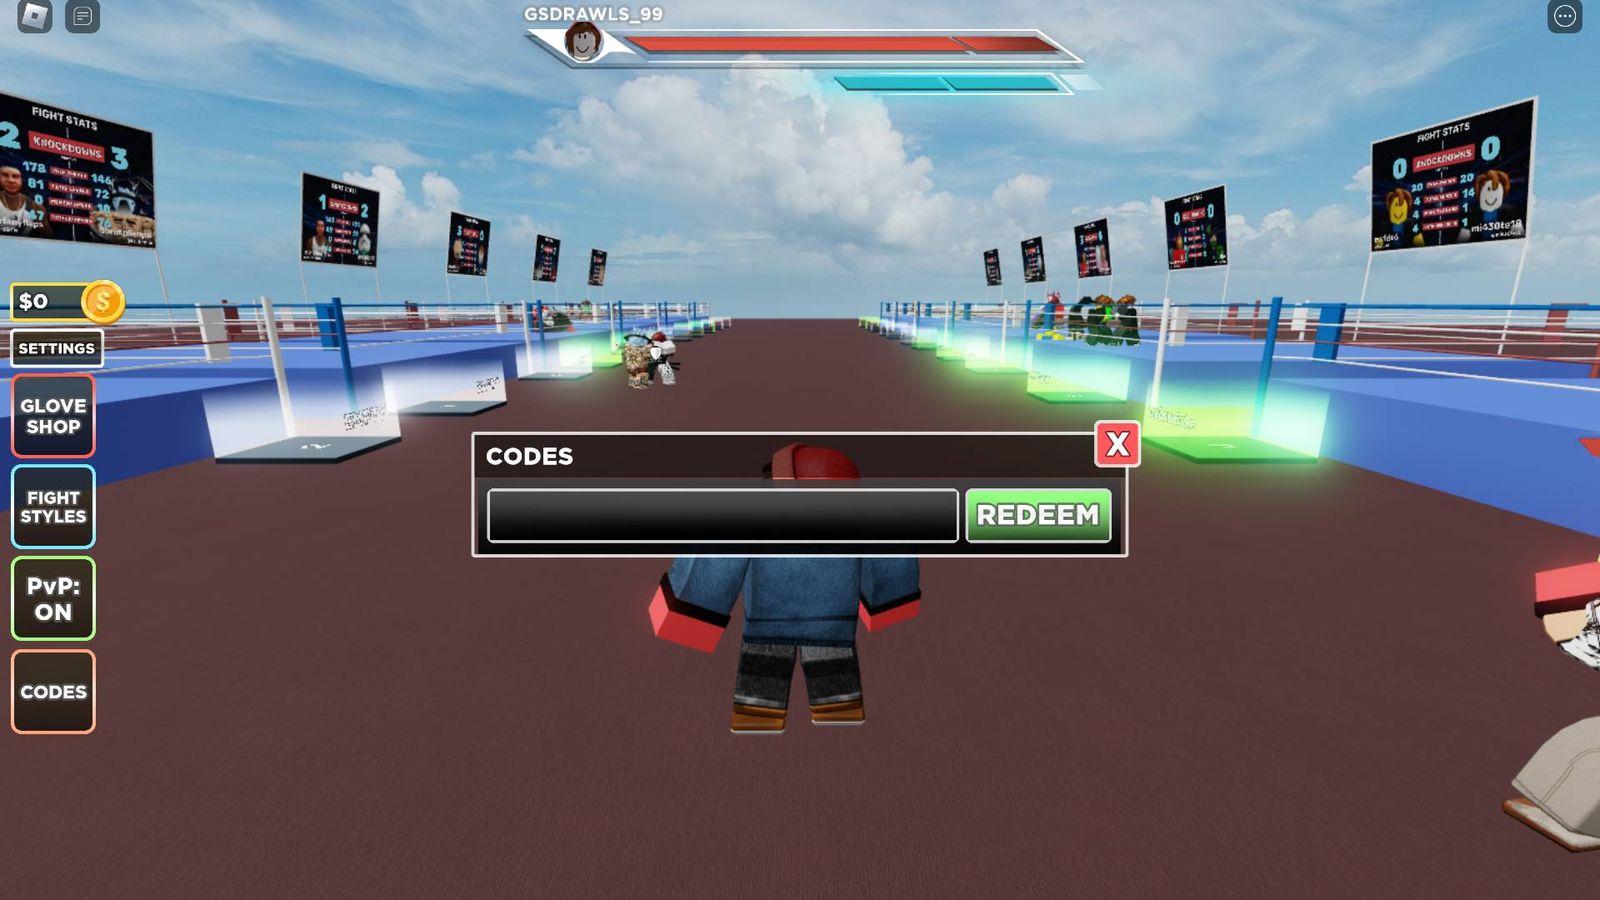 The code redemption screen in Untitled Boxing Game.